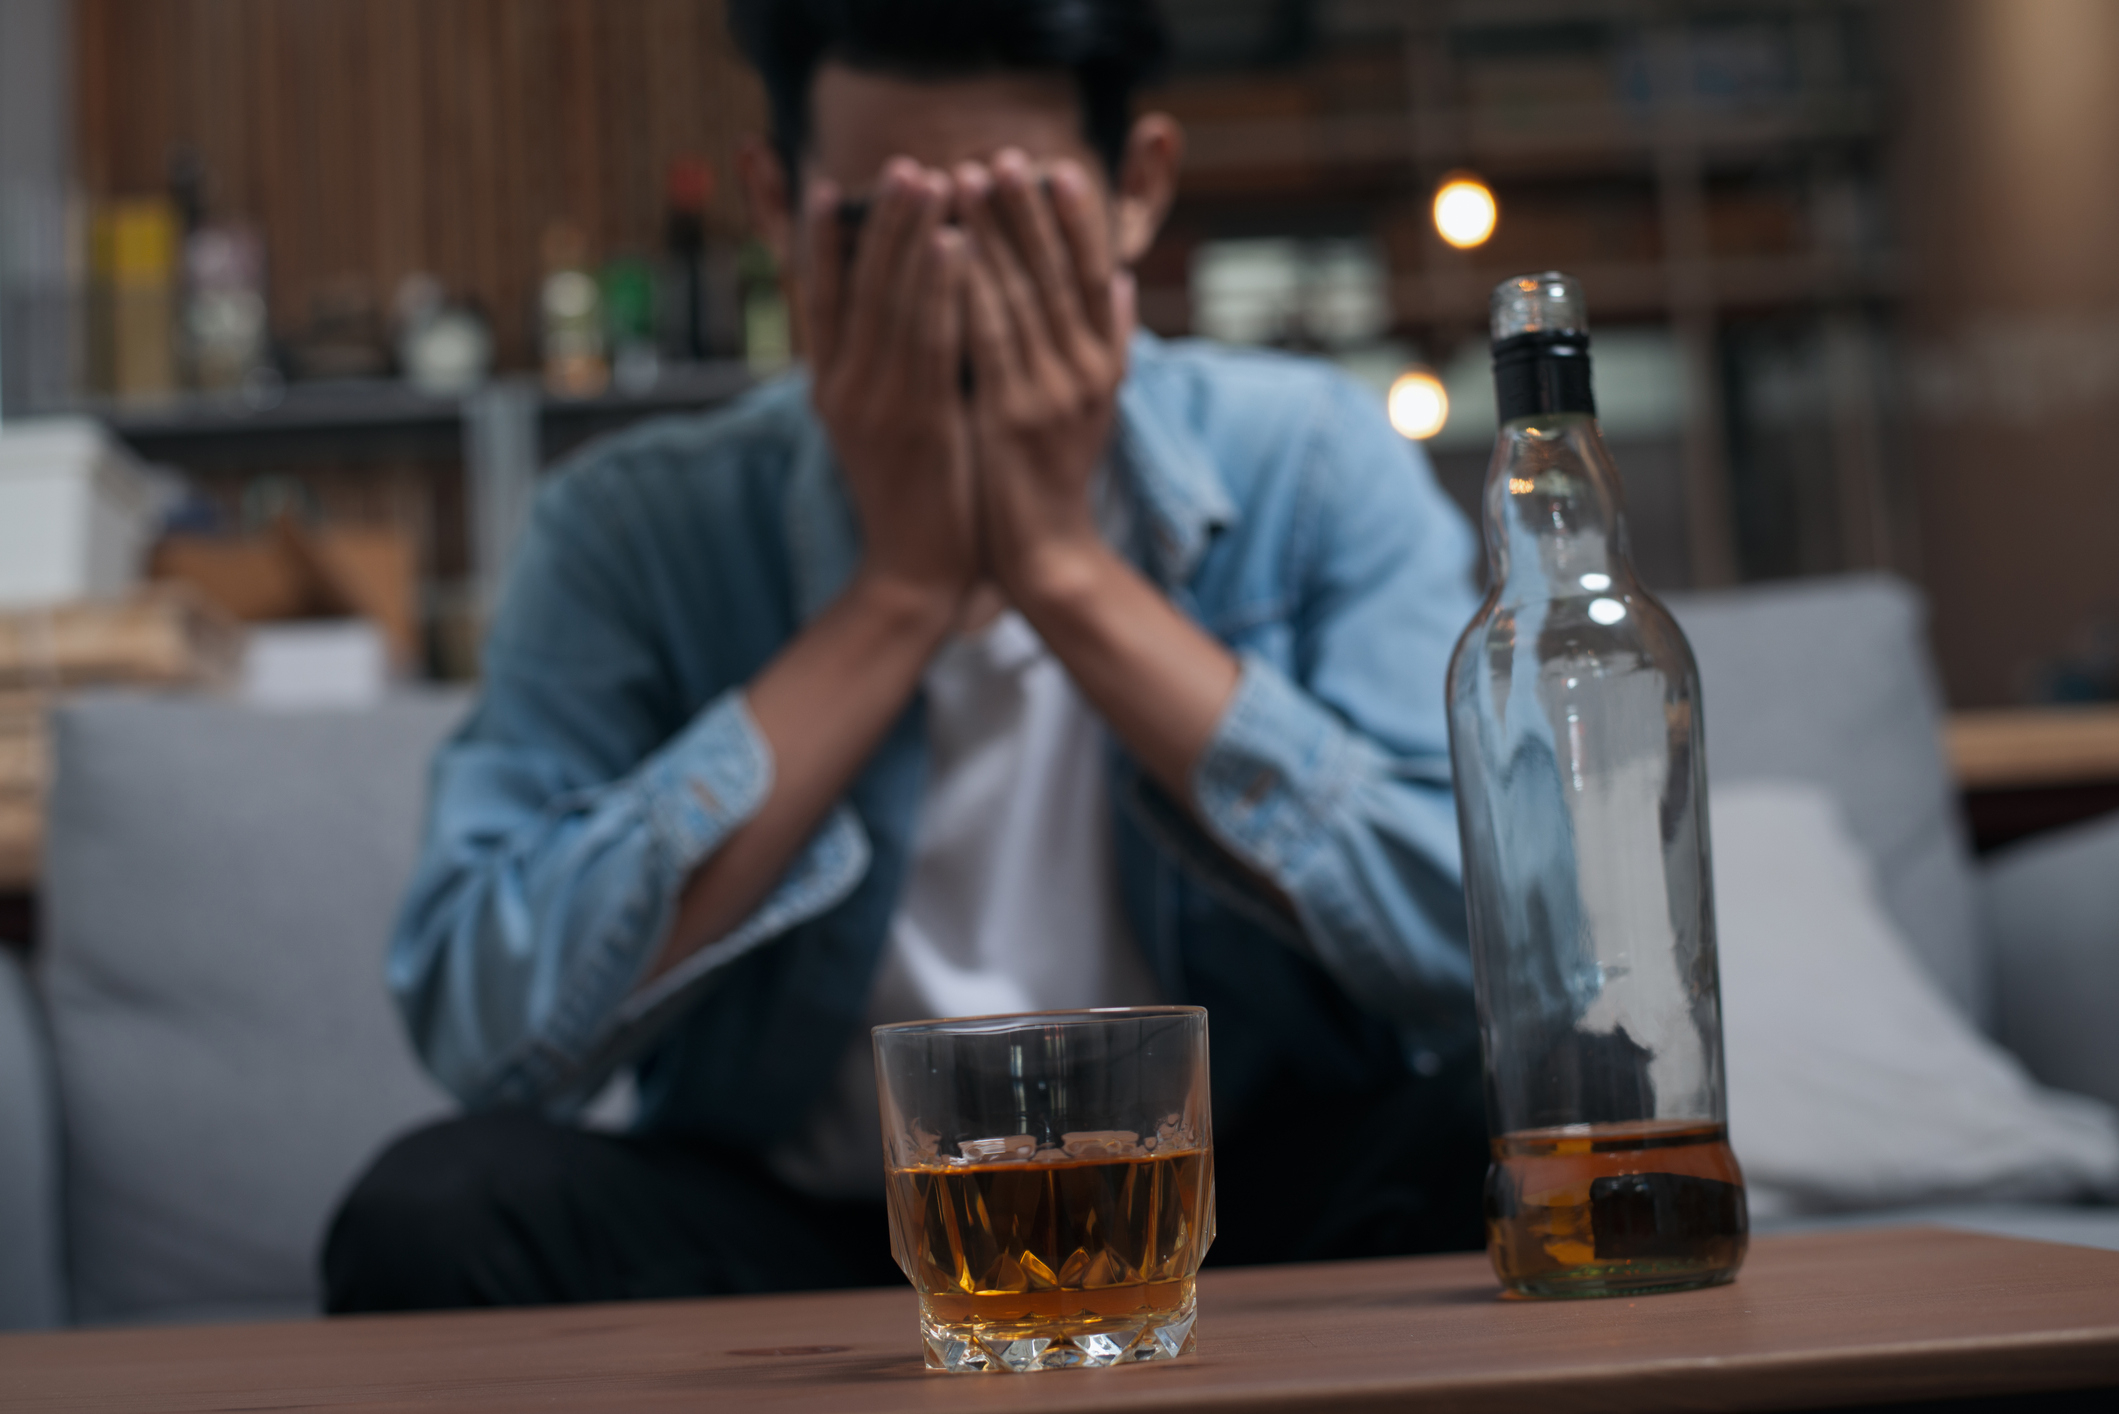 Person sitting with hands covering face, a bottle and a glass of whiskey in the foreground, signifying distress or sadness